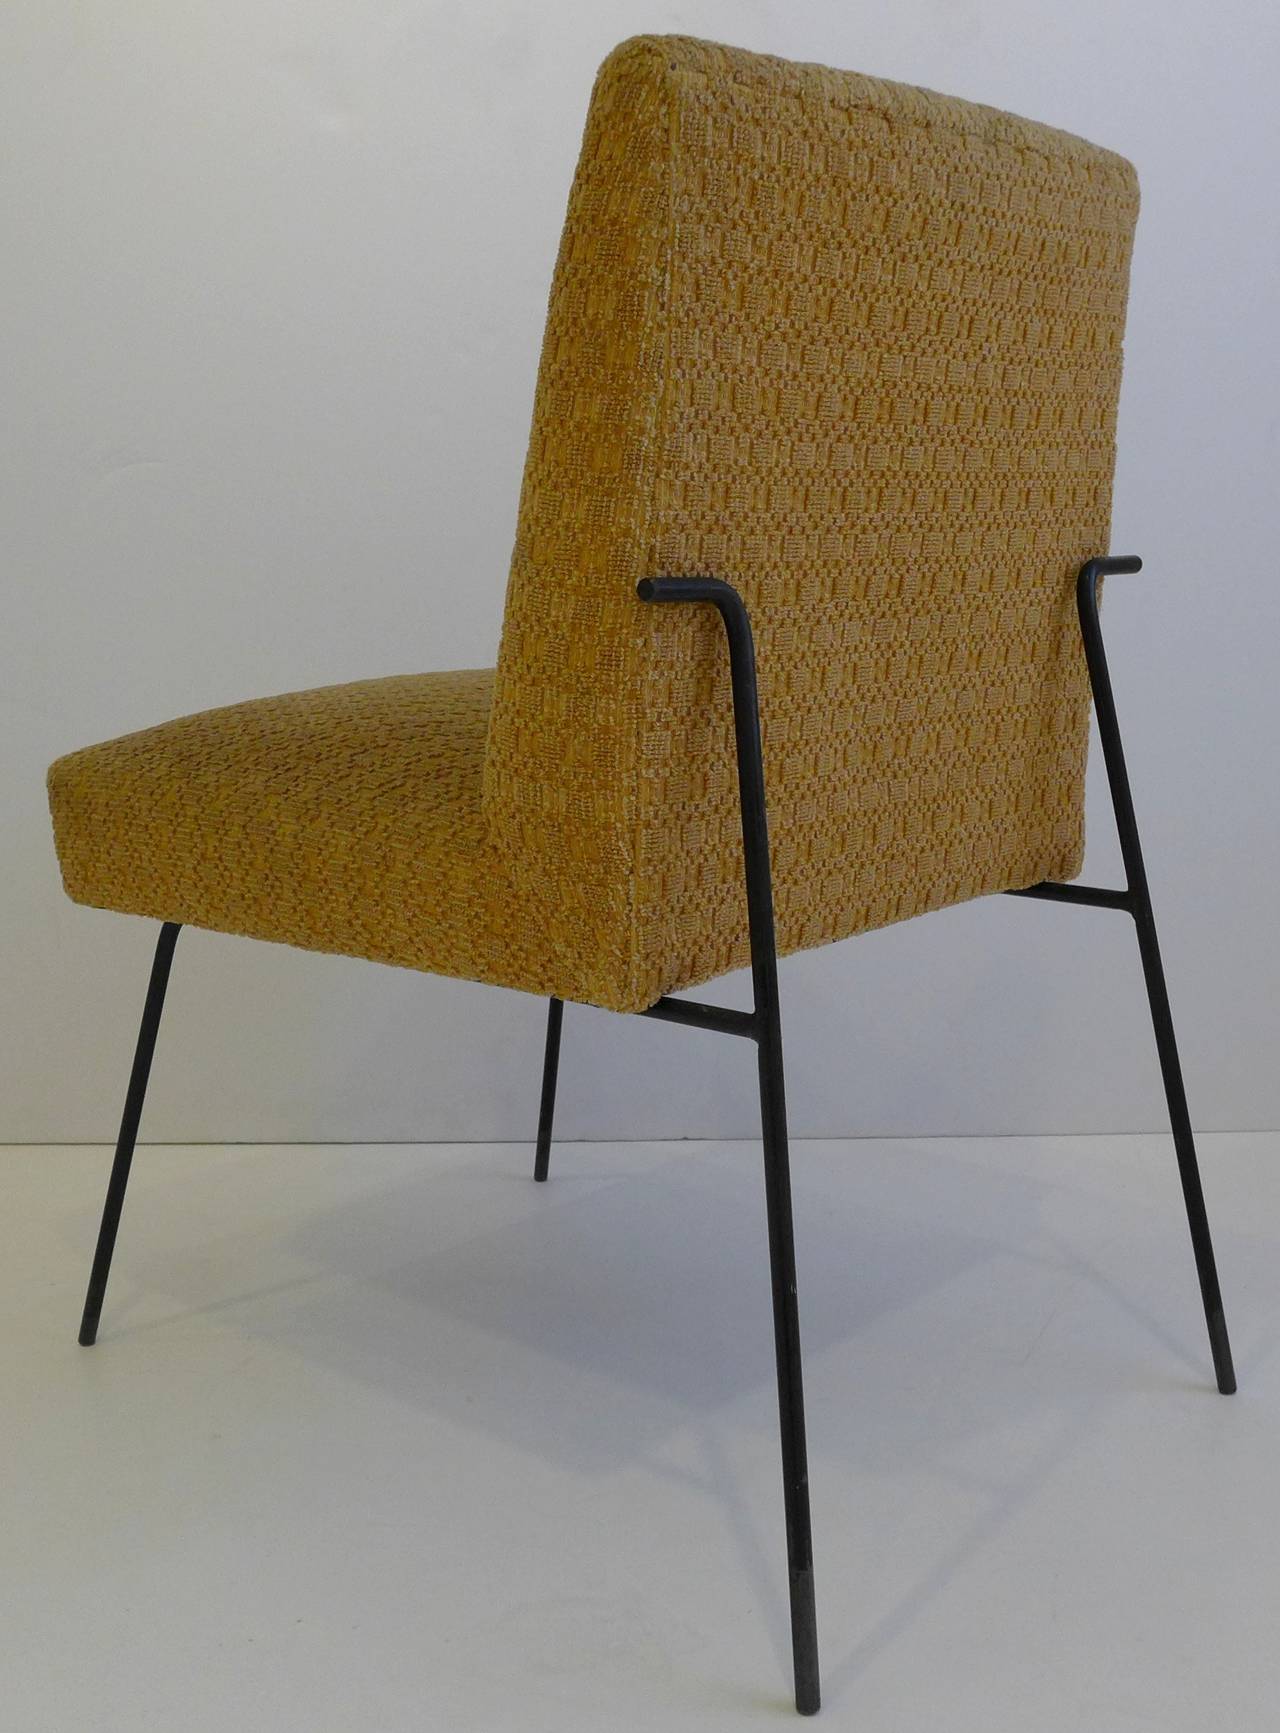 A rare and early chair design by one of America's great post-war designers, Milo Baughman. An elegant and sculptural use of wrought iron and spring-construction upholstery, produced by Pacific Iron Products, c. 1950. The right-turn elements at the